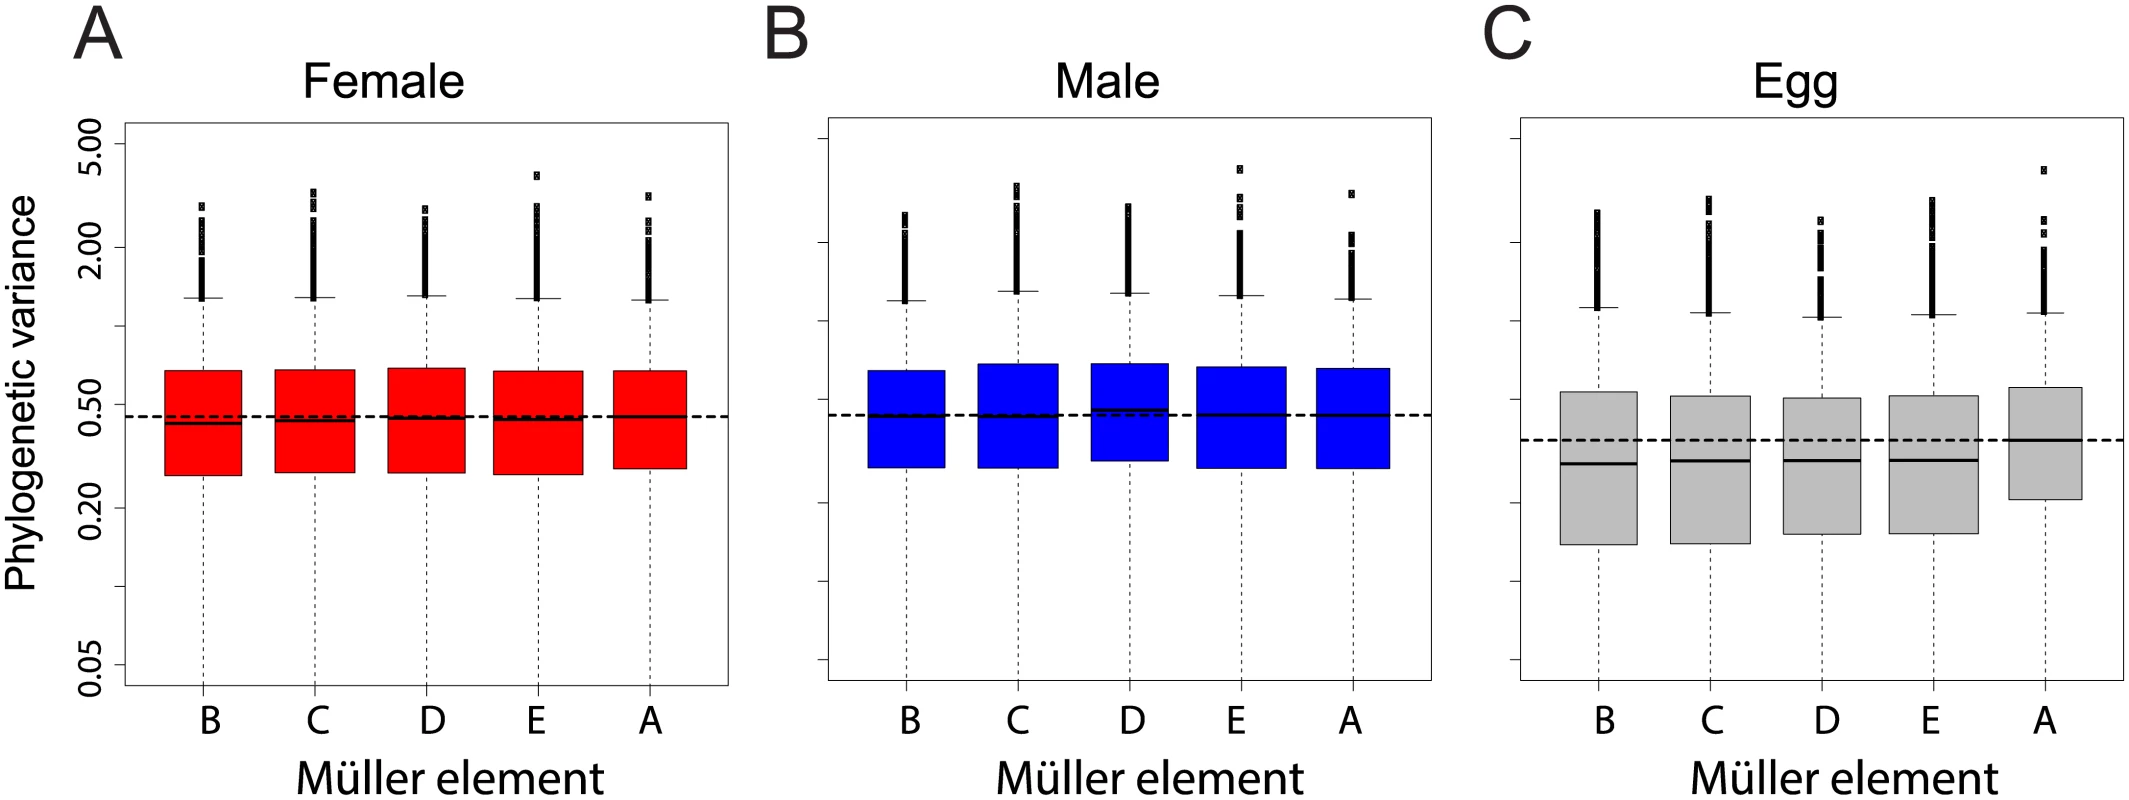 Chromosomal distribution of inter-species gene expression divergence in females (A), males (B) and eggs (C).